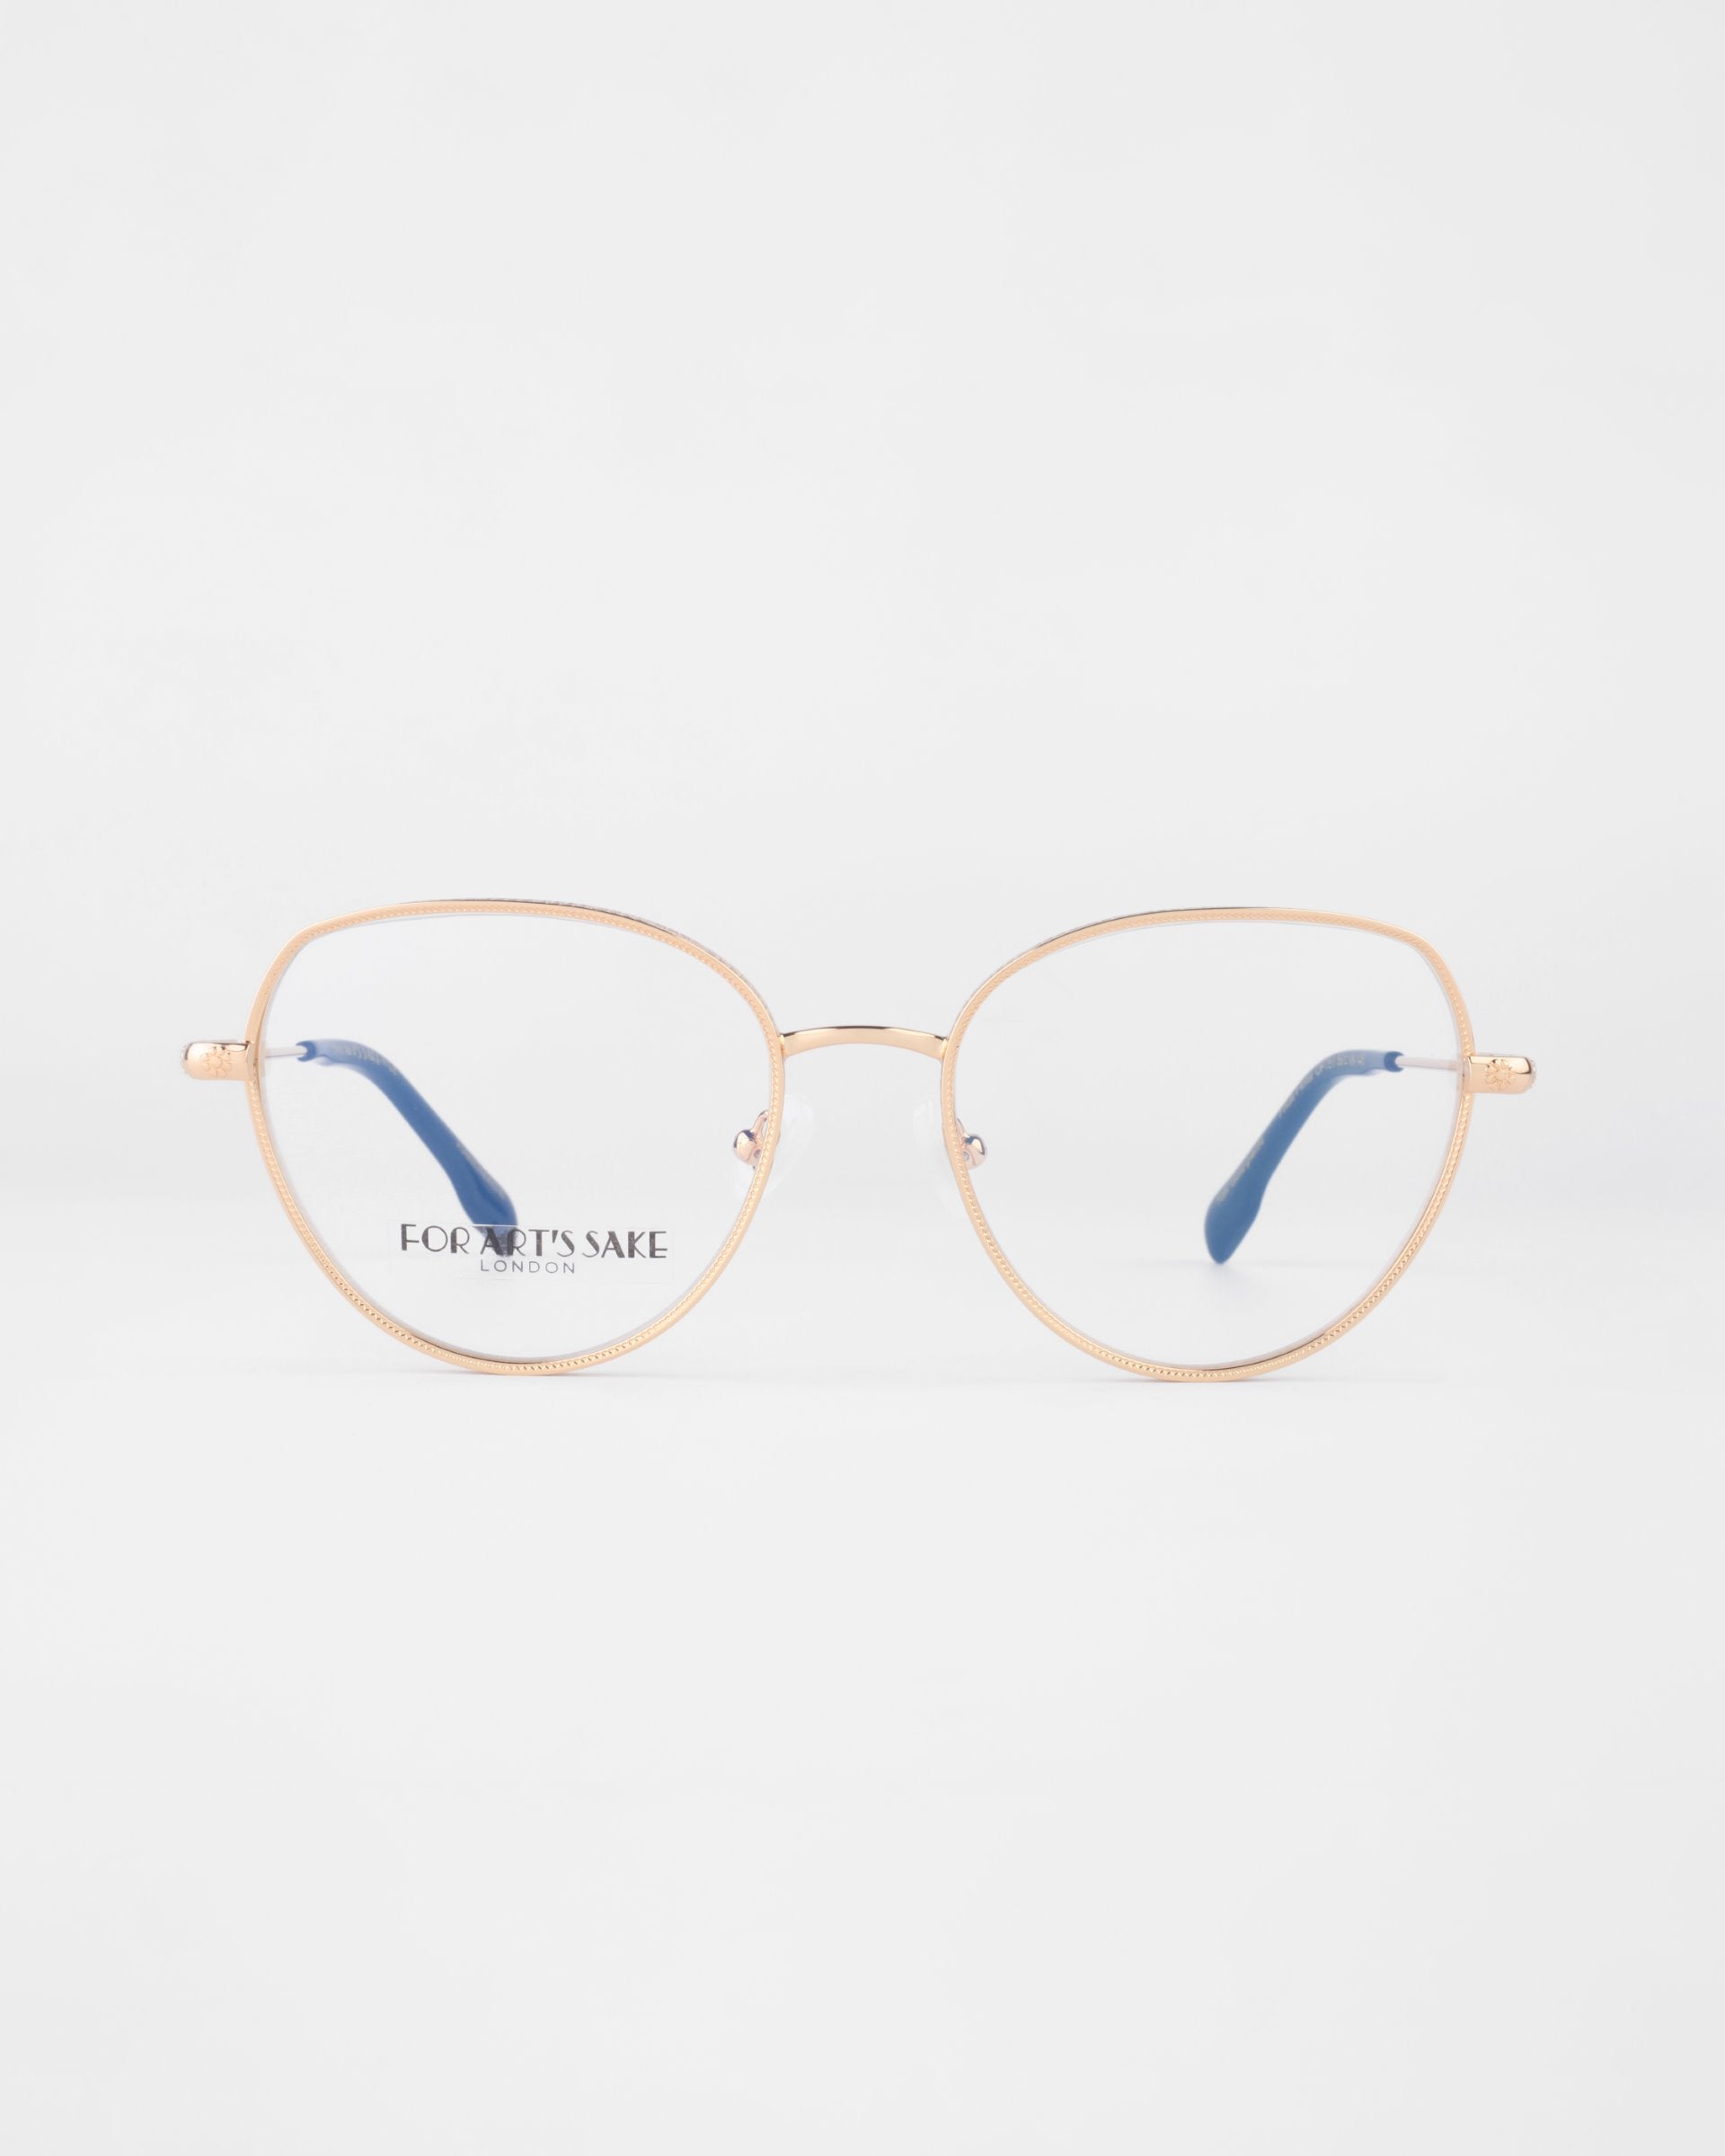 A pair of gold-framed eyeglasses with thin round prescription lenses and blue temple tips. The watermark text "FOR ART'S SAKE" is visible on the left lens. The Frida Floral glasses from For Art's Sake®, fitted with a blue light filter, are set against a plain, light background.